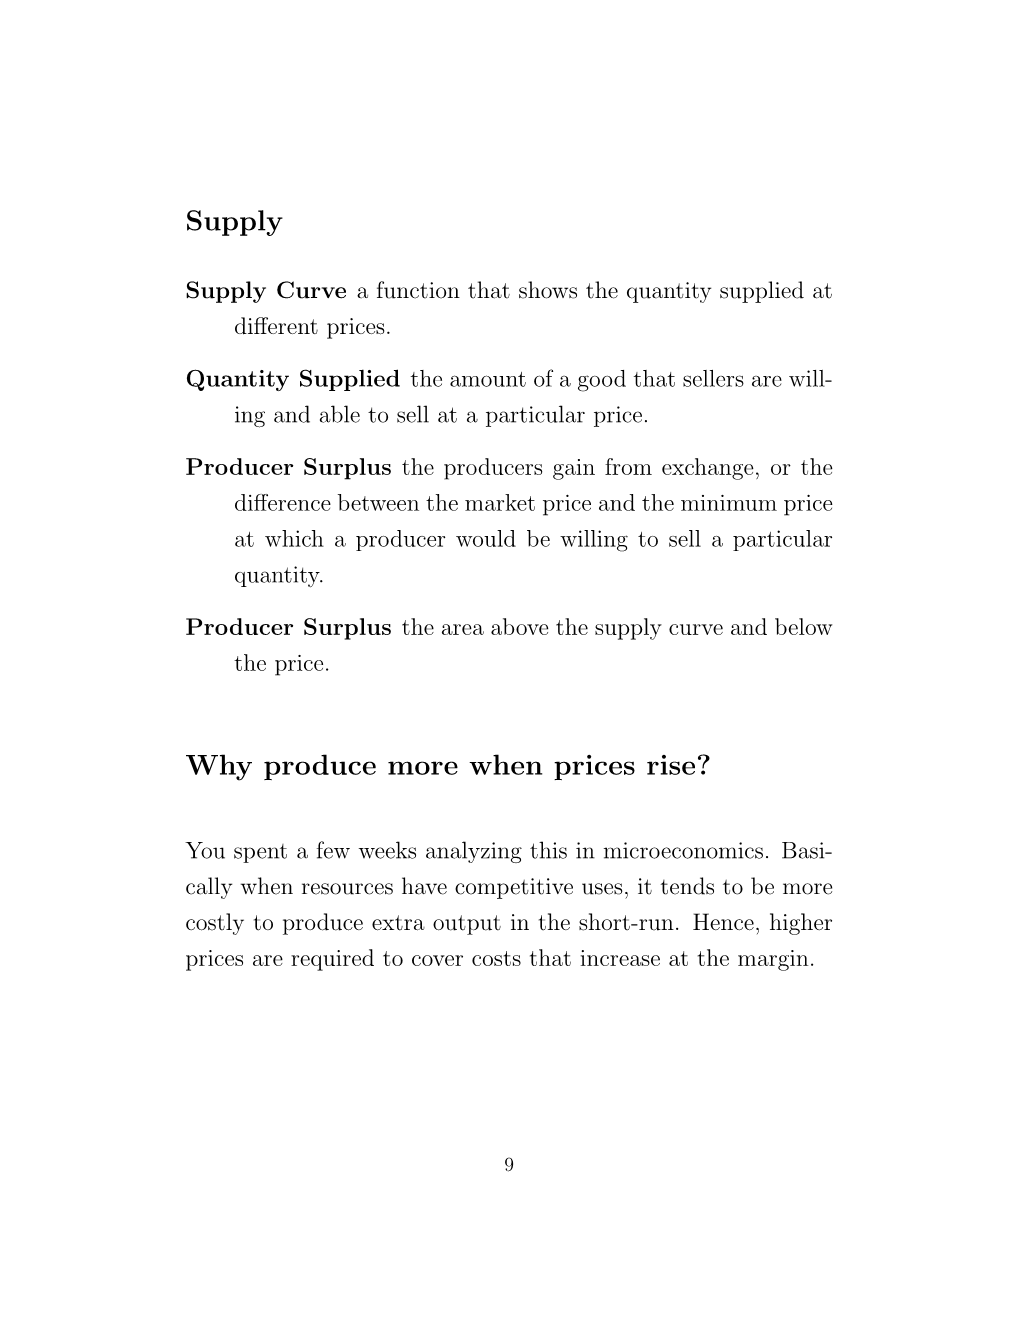 Supply Why Produce More When Prices Rise?